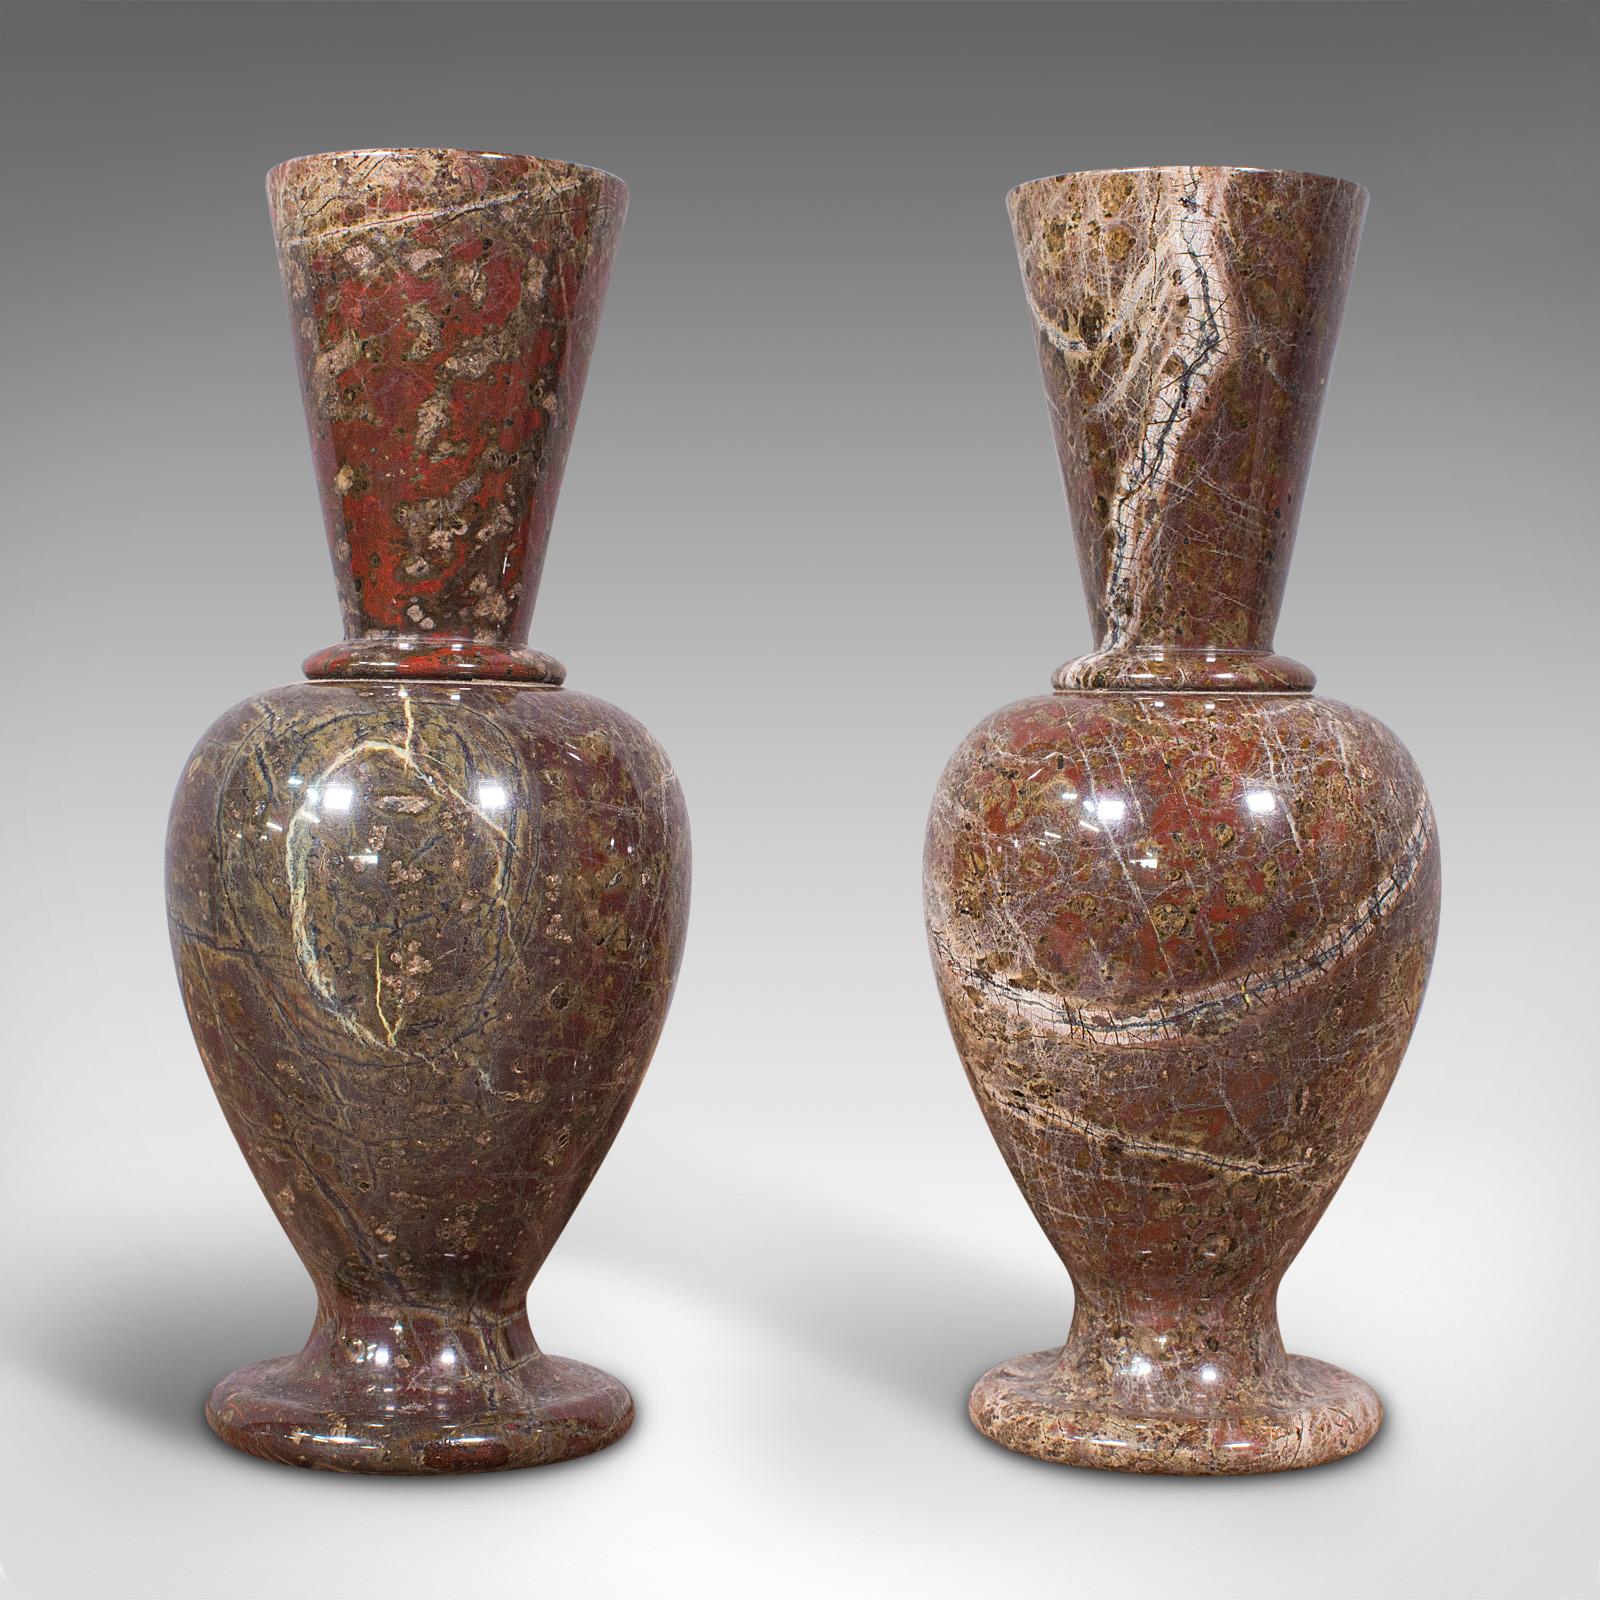 This is a pair of antique decorative posy vases. An English, polished granite flower urn, dating to the late Victorian period, circa 1900.

Striking appearance and beautifully tactile
Displays a desirable aged patina and in good order
Polished